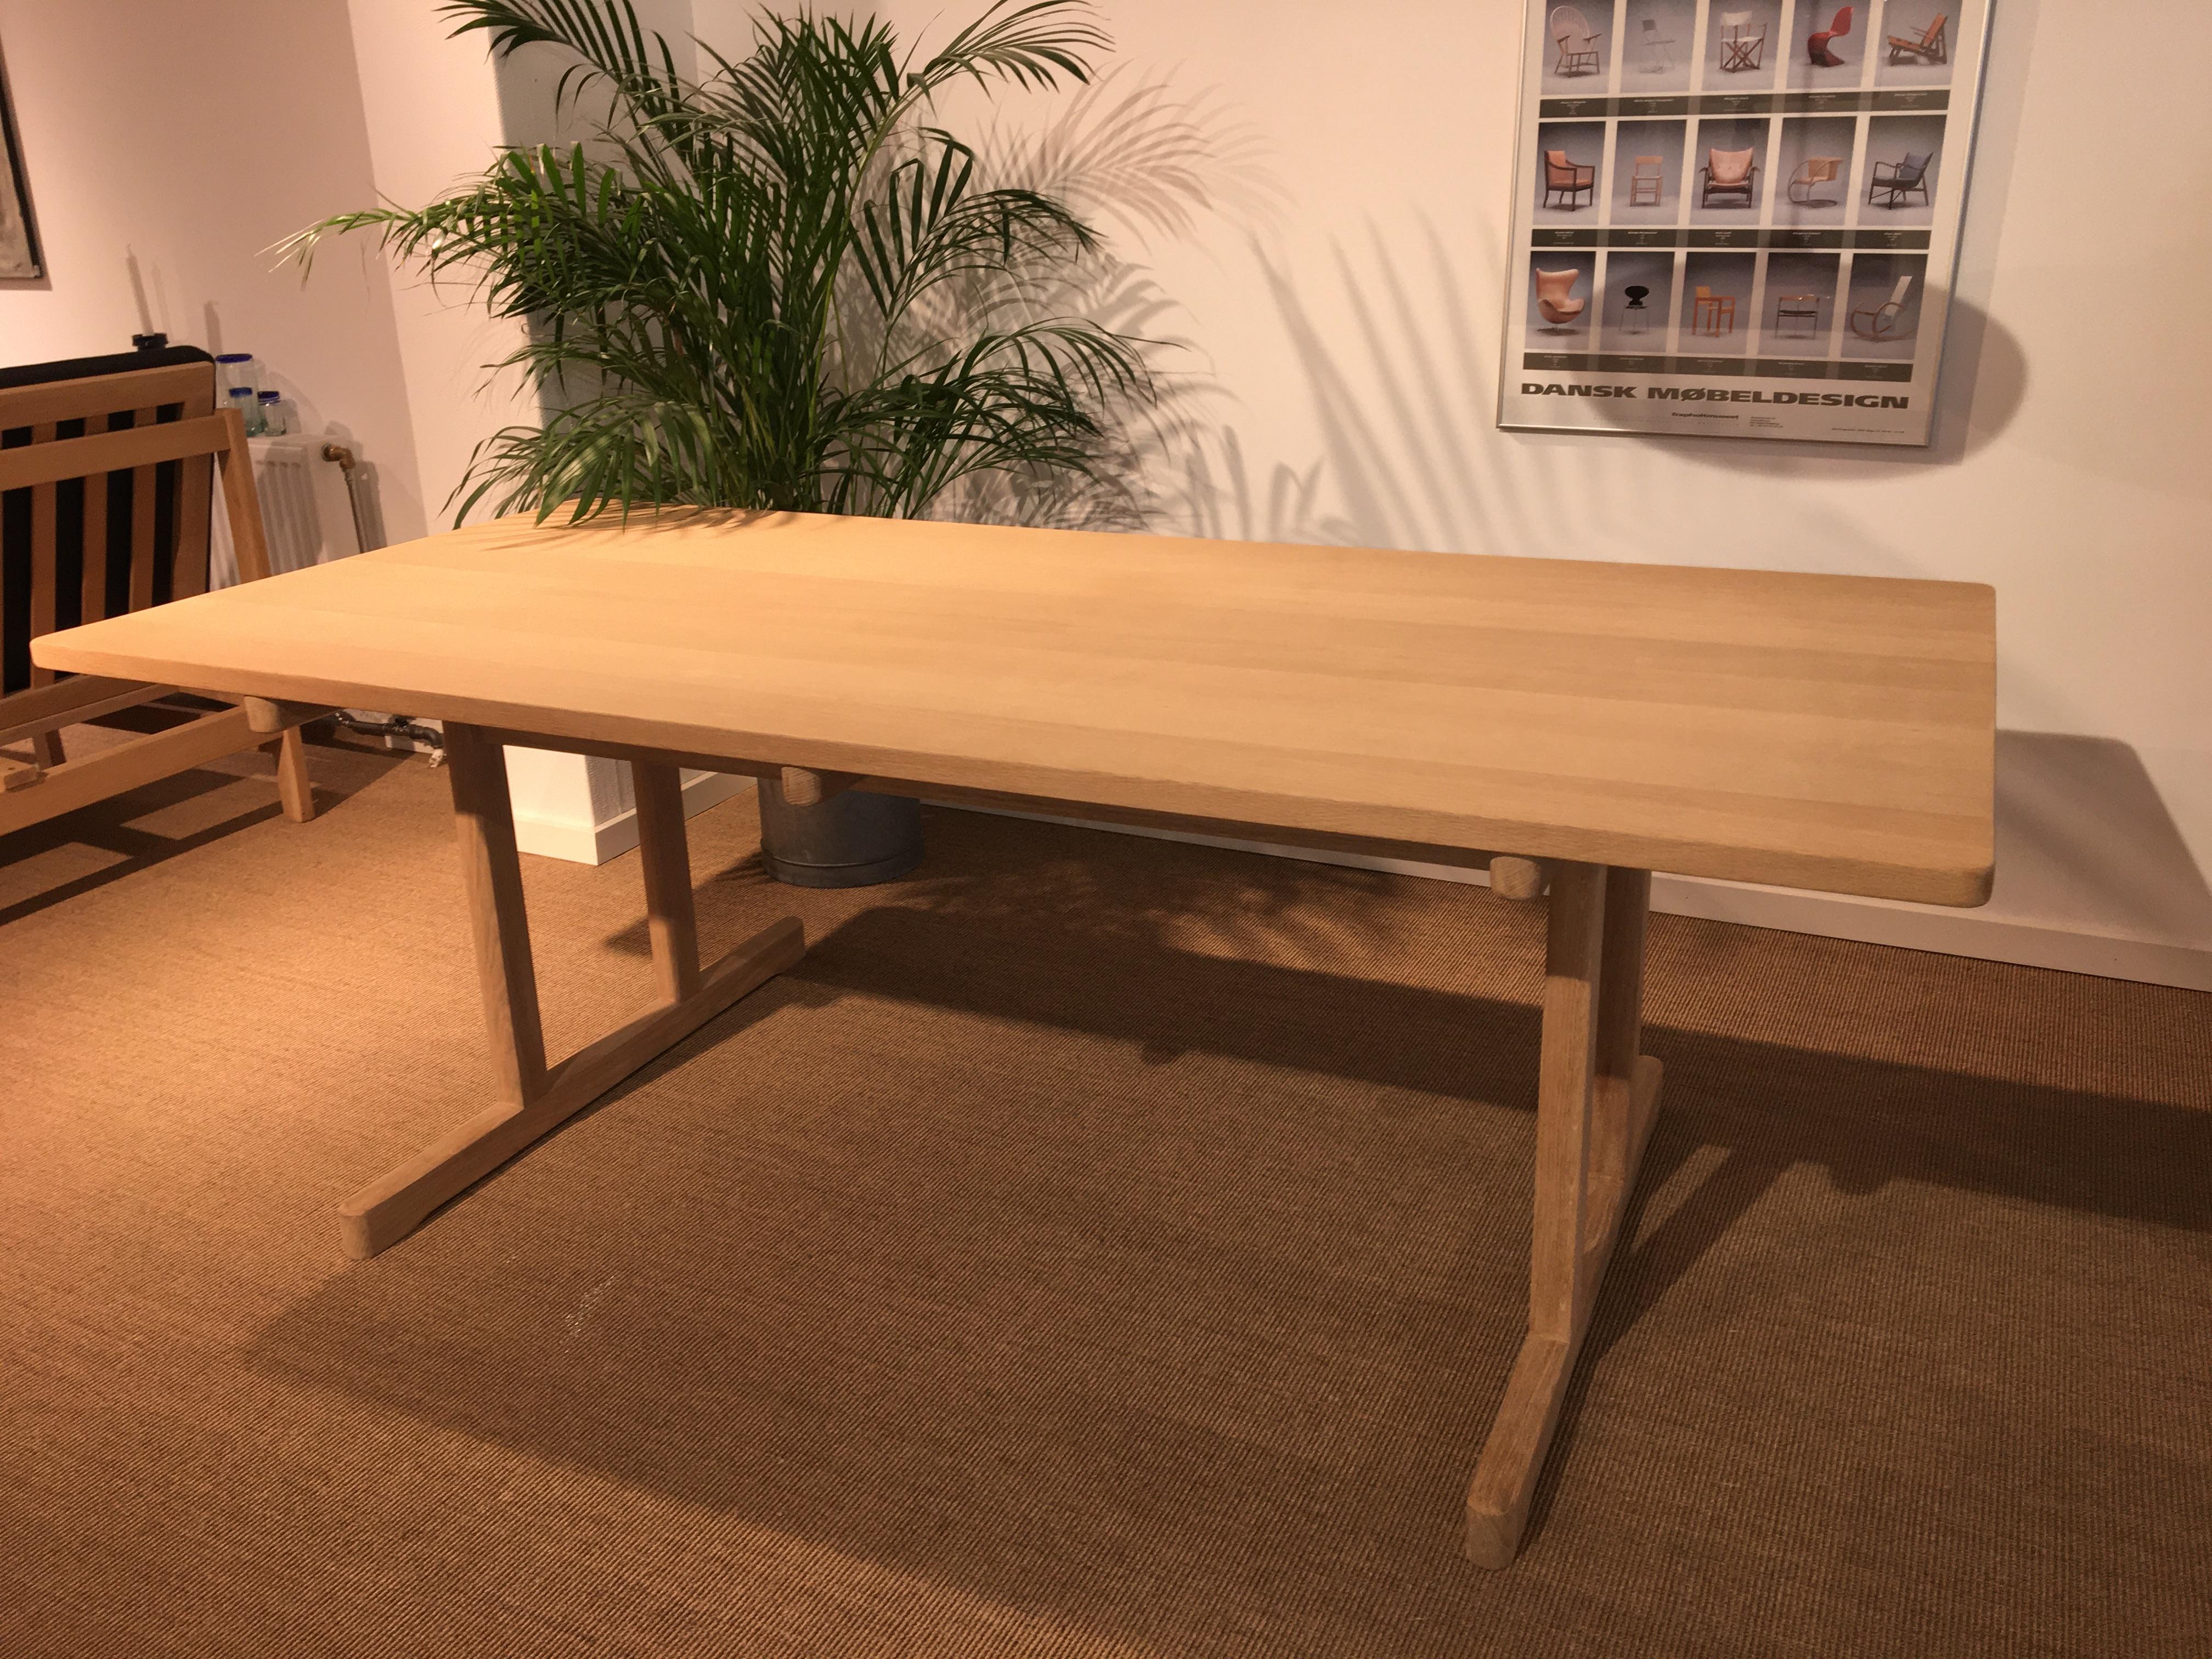 Shaker table in solid oak model 6286. Designet by Borge Mogensen.
Beautiful freshly ground solid oak shaker table model 6286, designed by Børge Mogensen in 1964.
The table appears solid oak with wide planks, newly ground untreated with polished